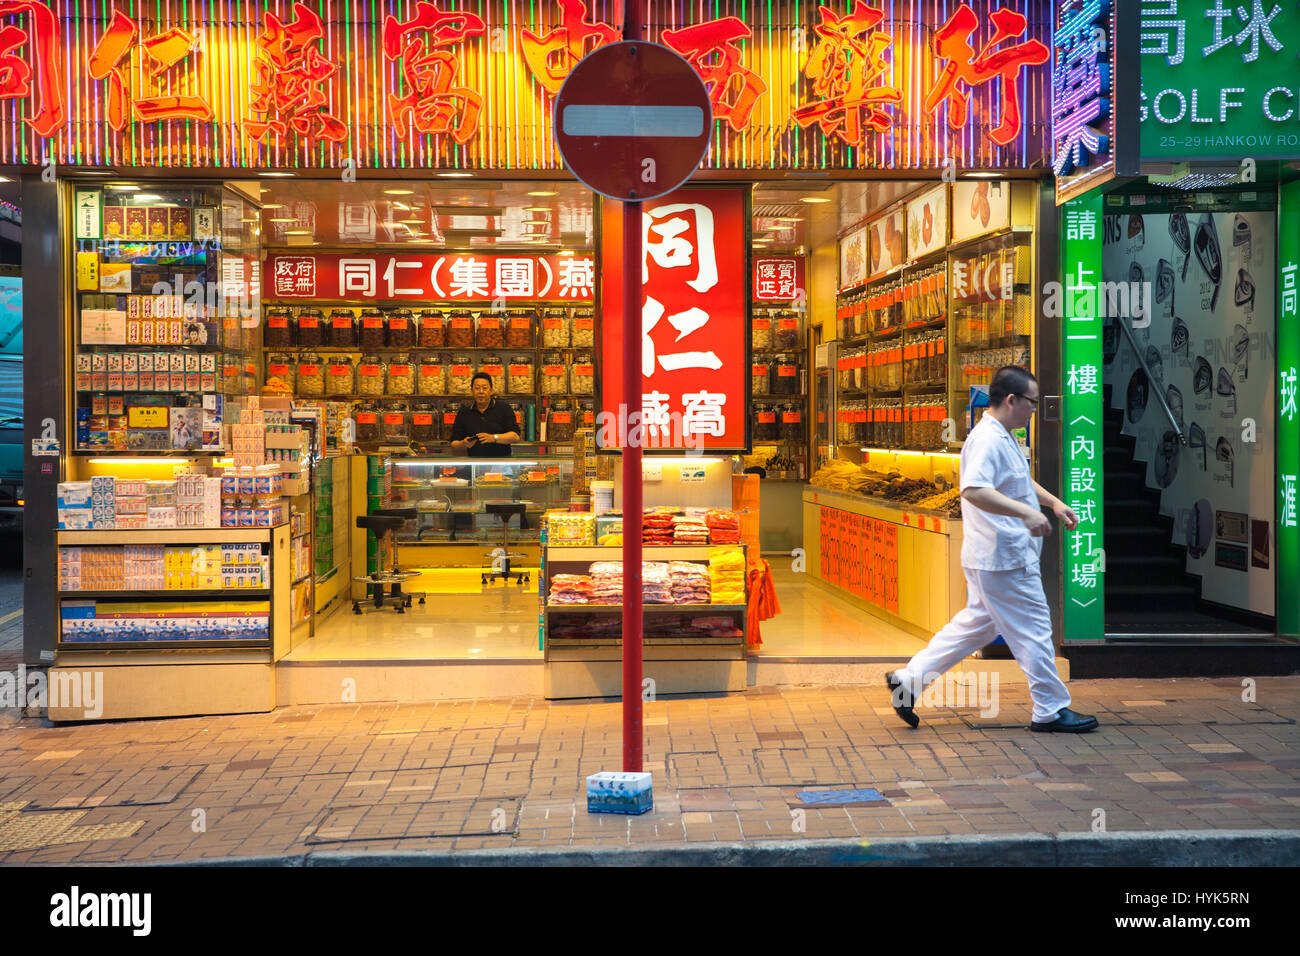 Hong Kong, China - February 16, 2014: Man passes by neon-lighted traditional Chinese medicine store on February 16, 2014 in Hong Kong, China. Stock Photo